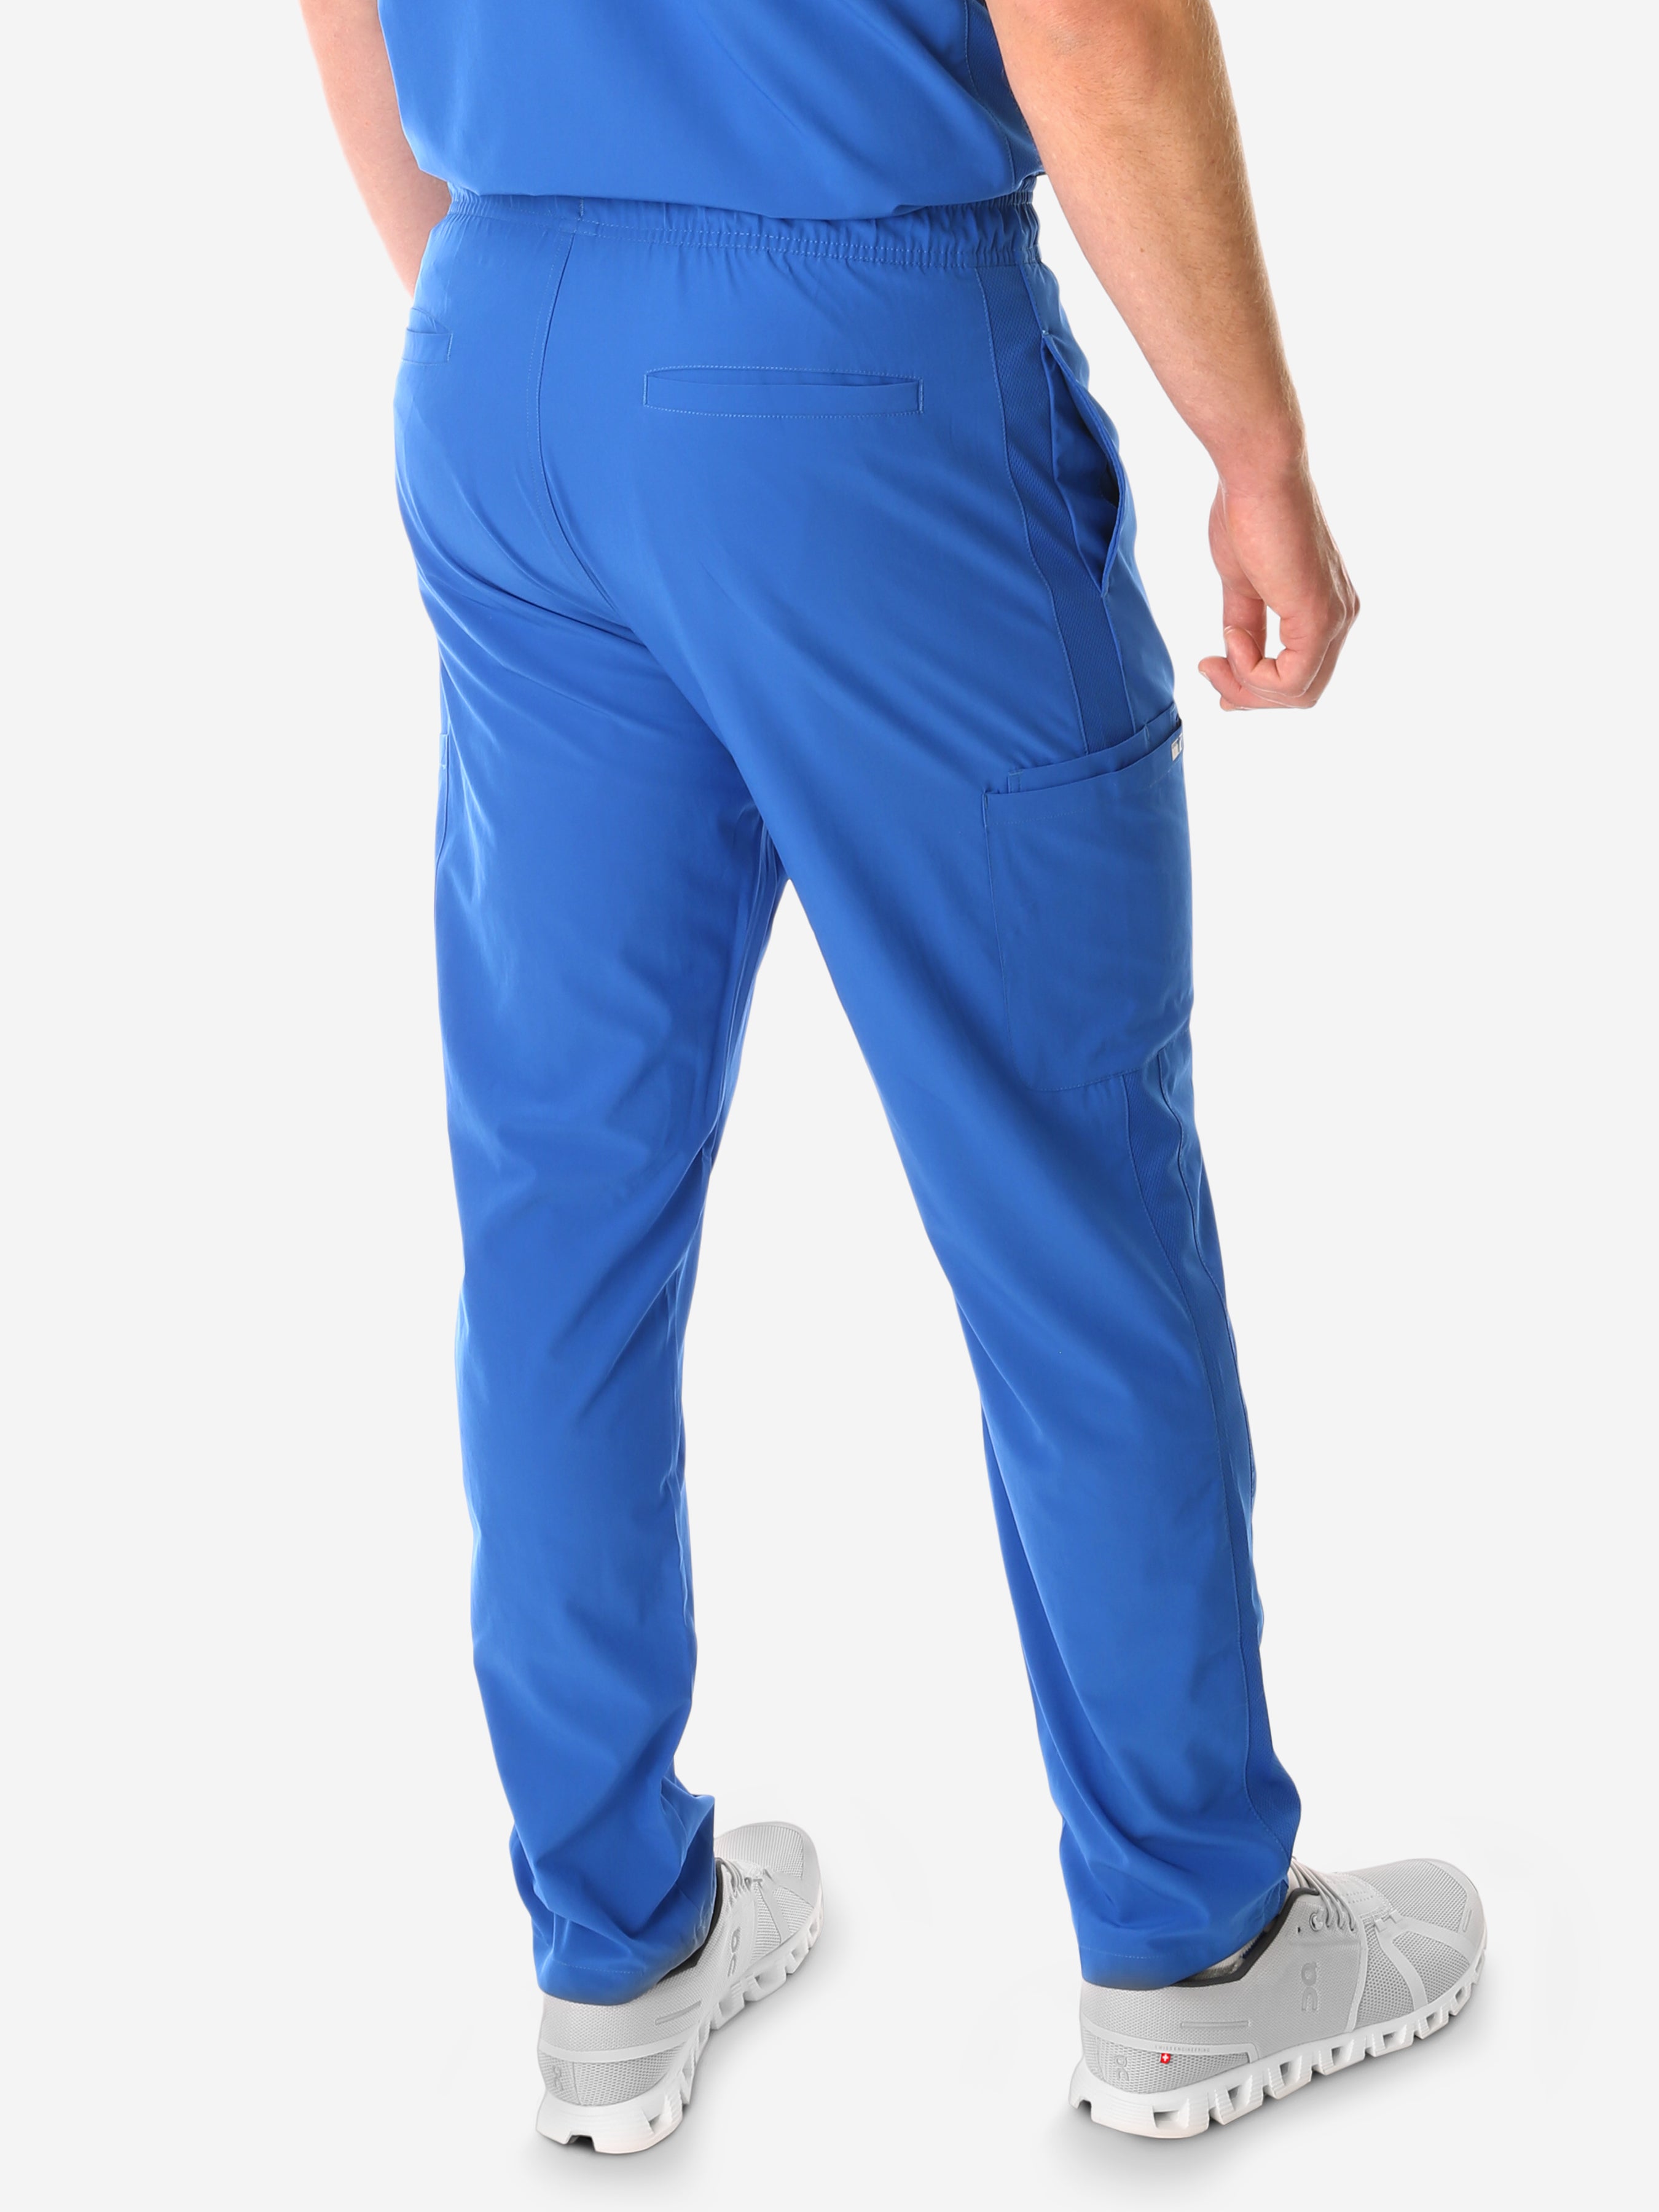 Scrubmates Under Scrub Pants for Men with Hip Pockets